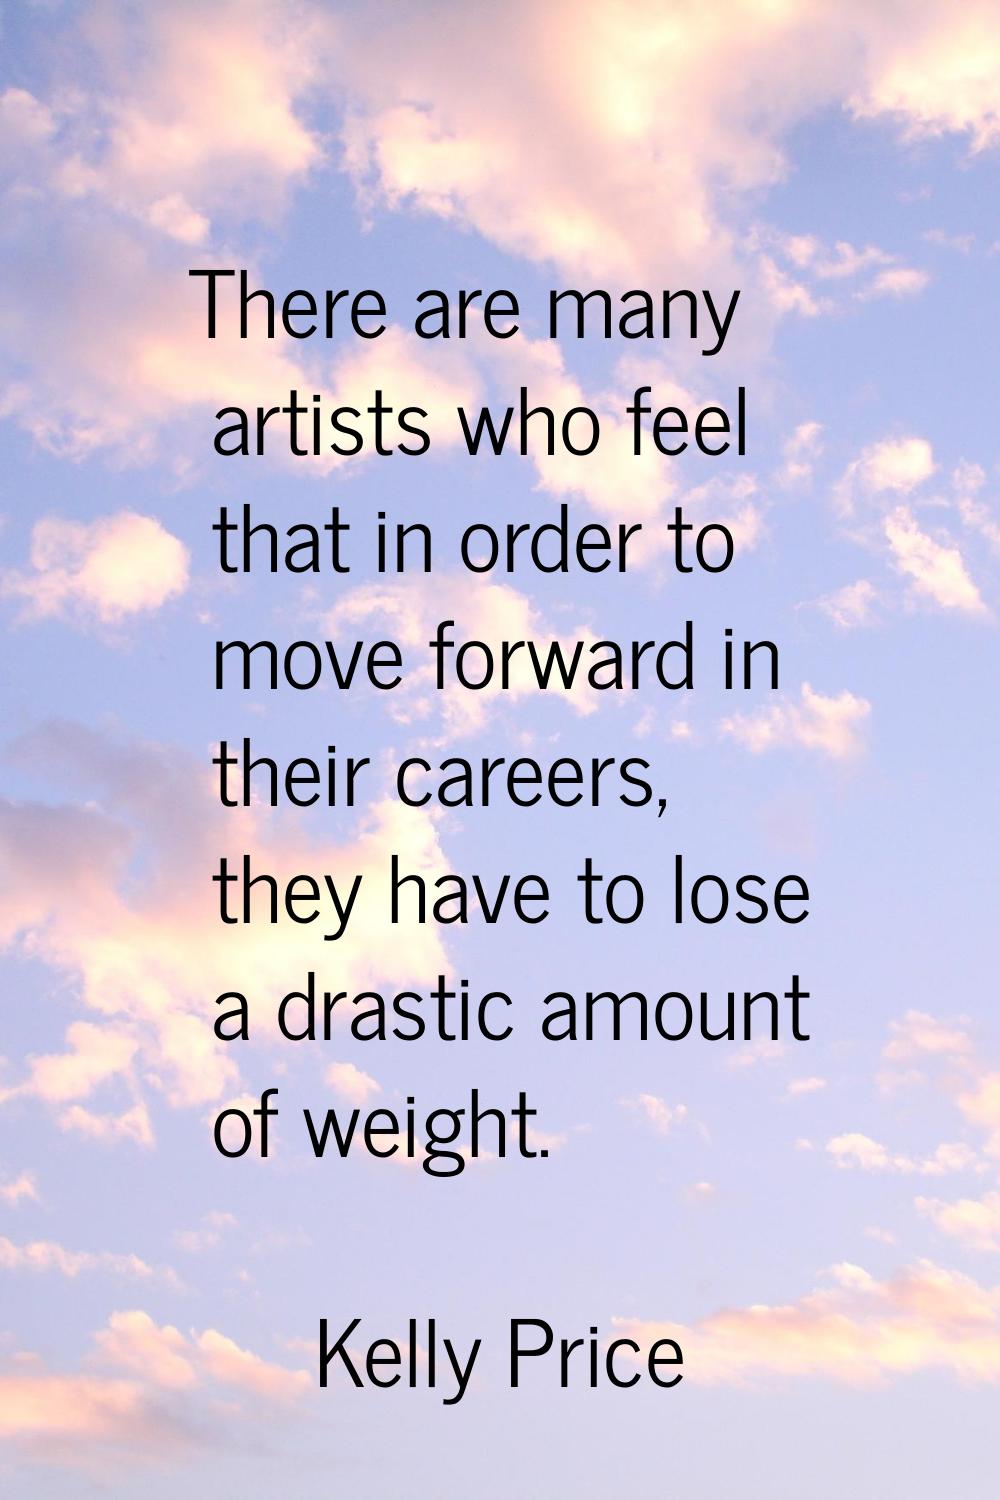 There are many artists who feel that in order to move forward in their careers, they have to lose a